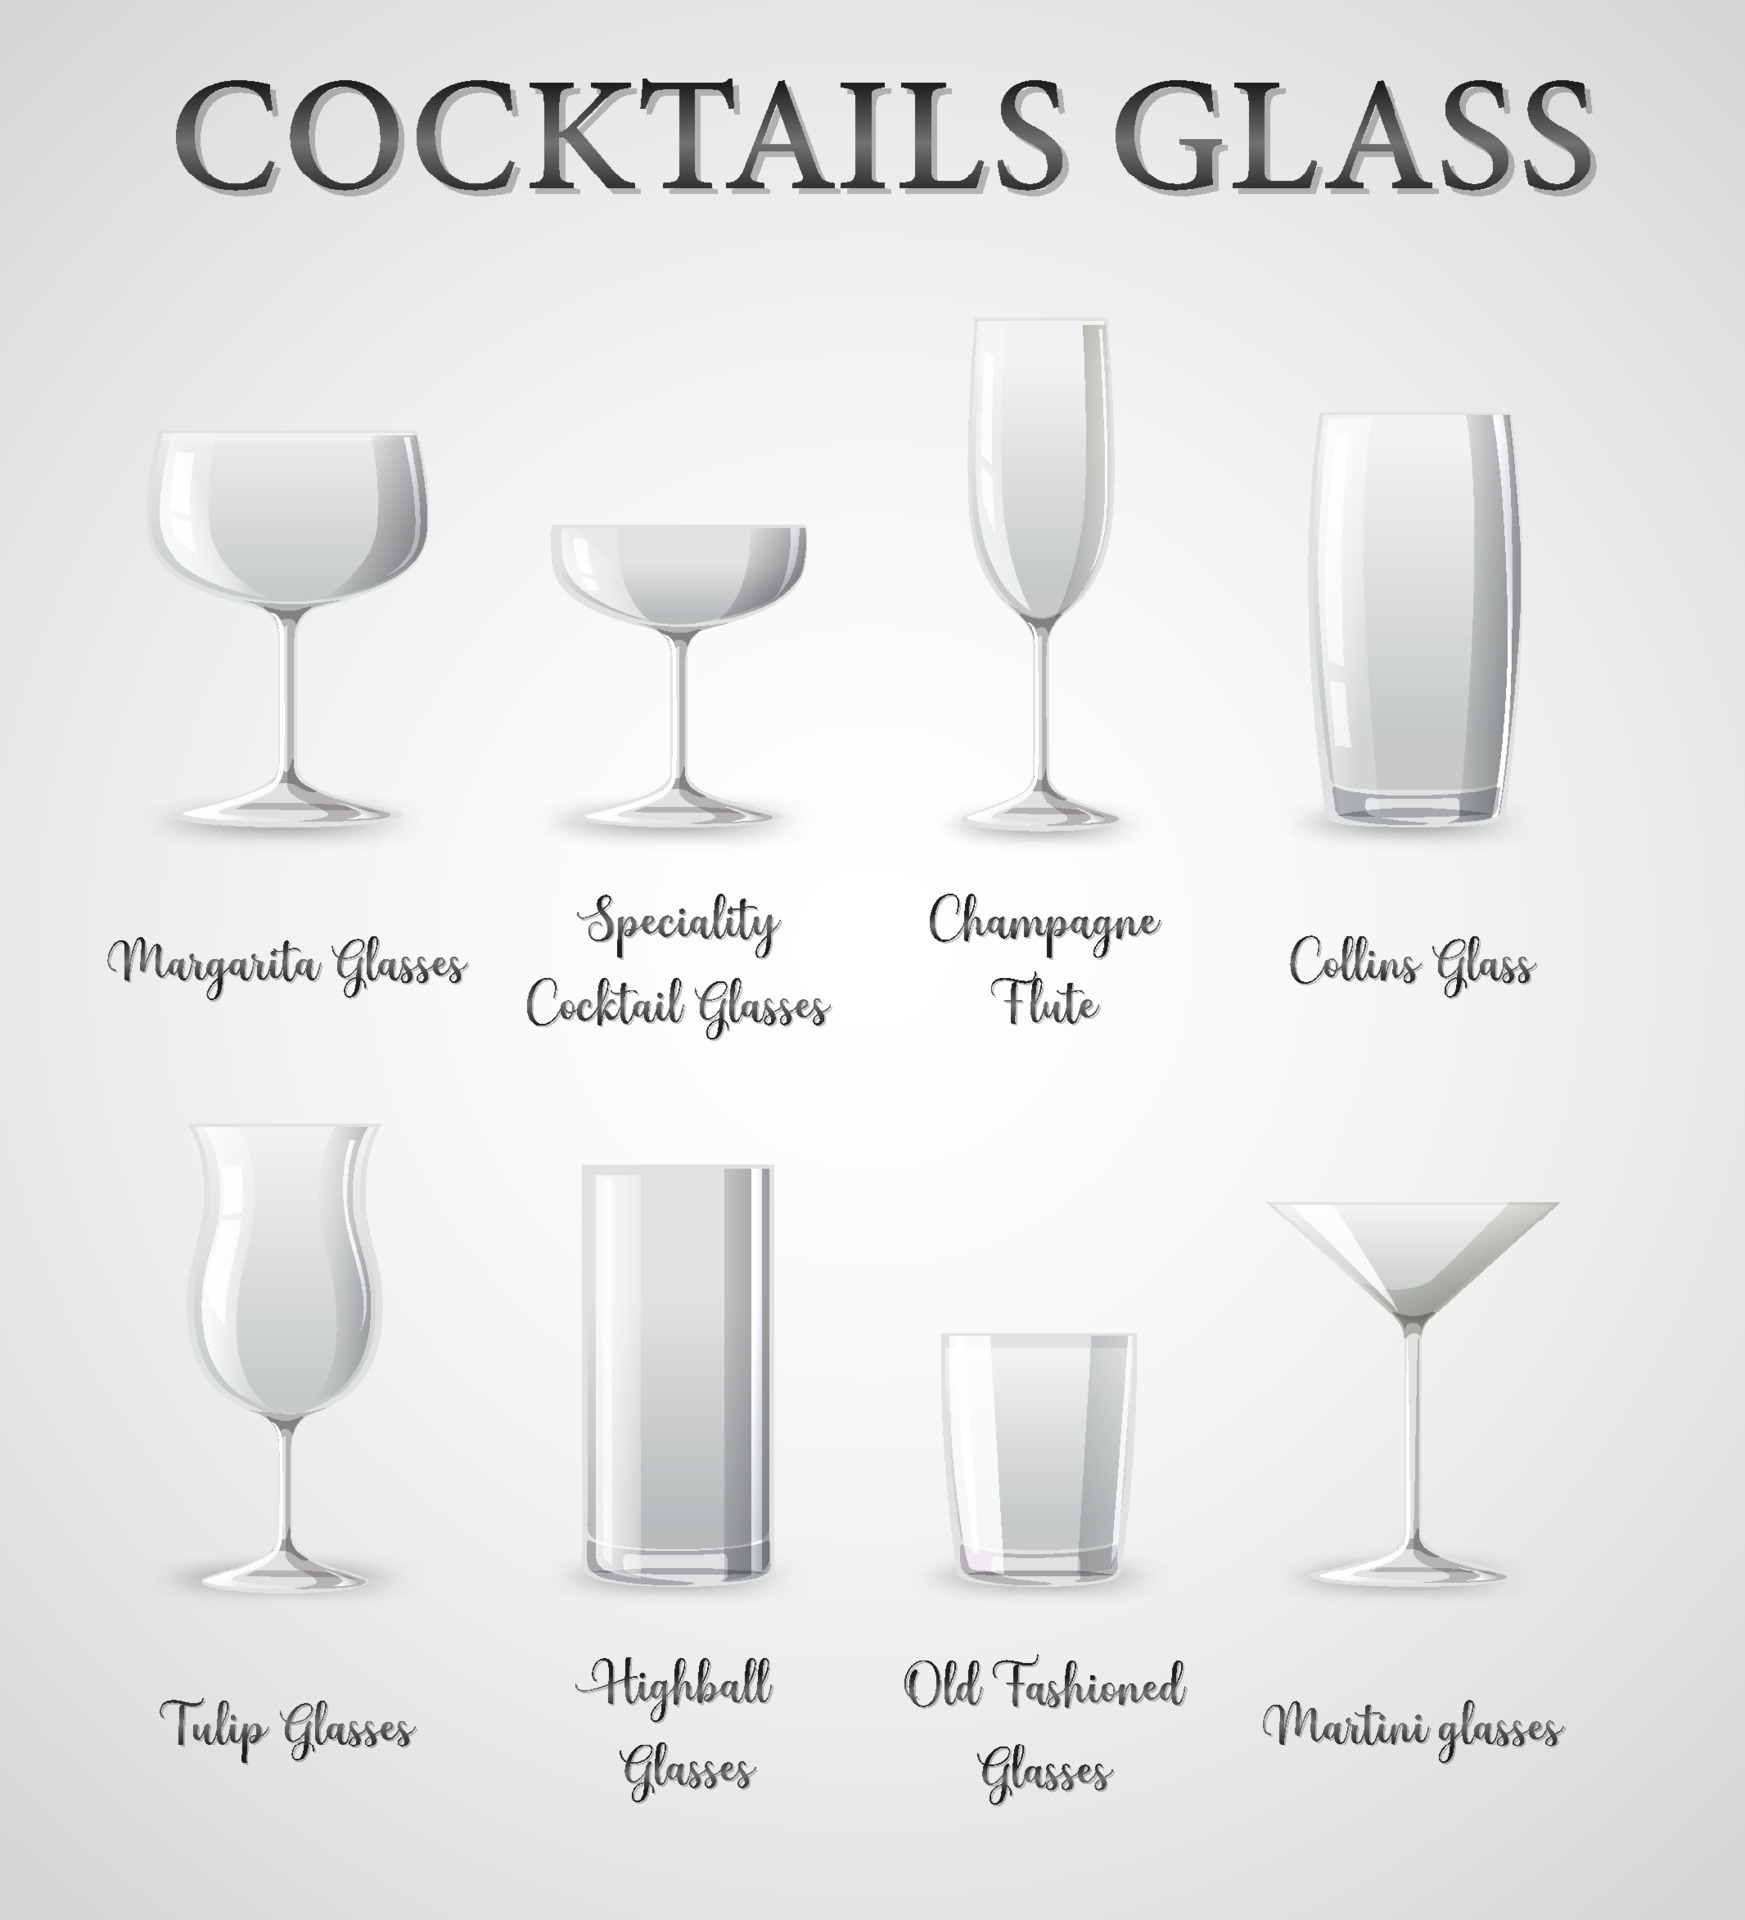 https://static.vecteezy.com/system/resources/previews/008/273/608/original/types-of-cocktail-glasses-free-vector.jpg